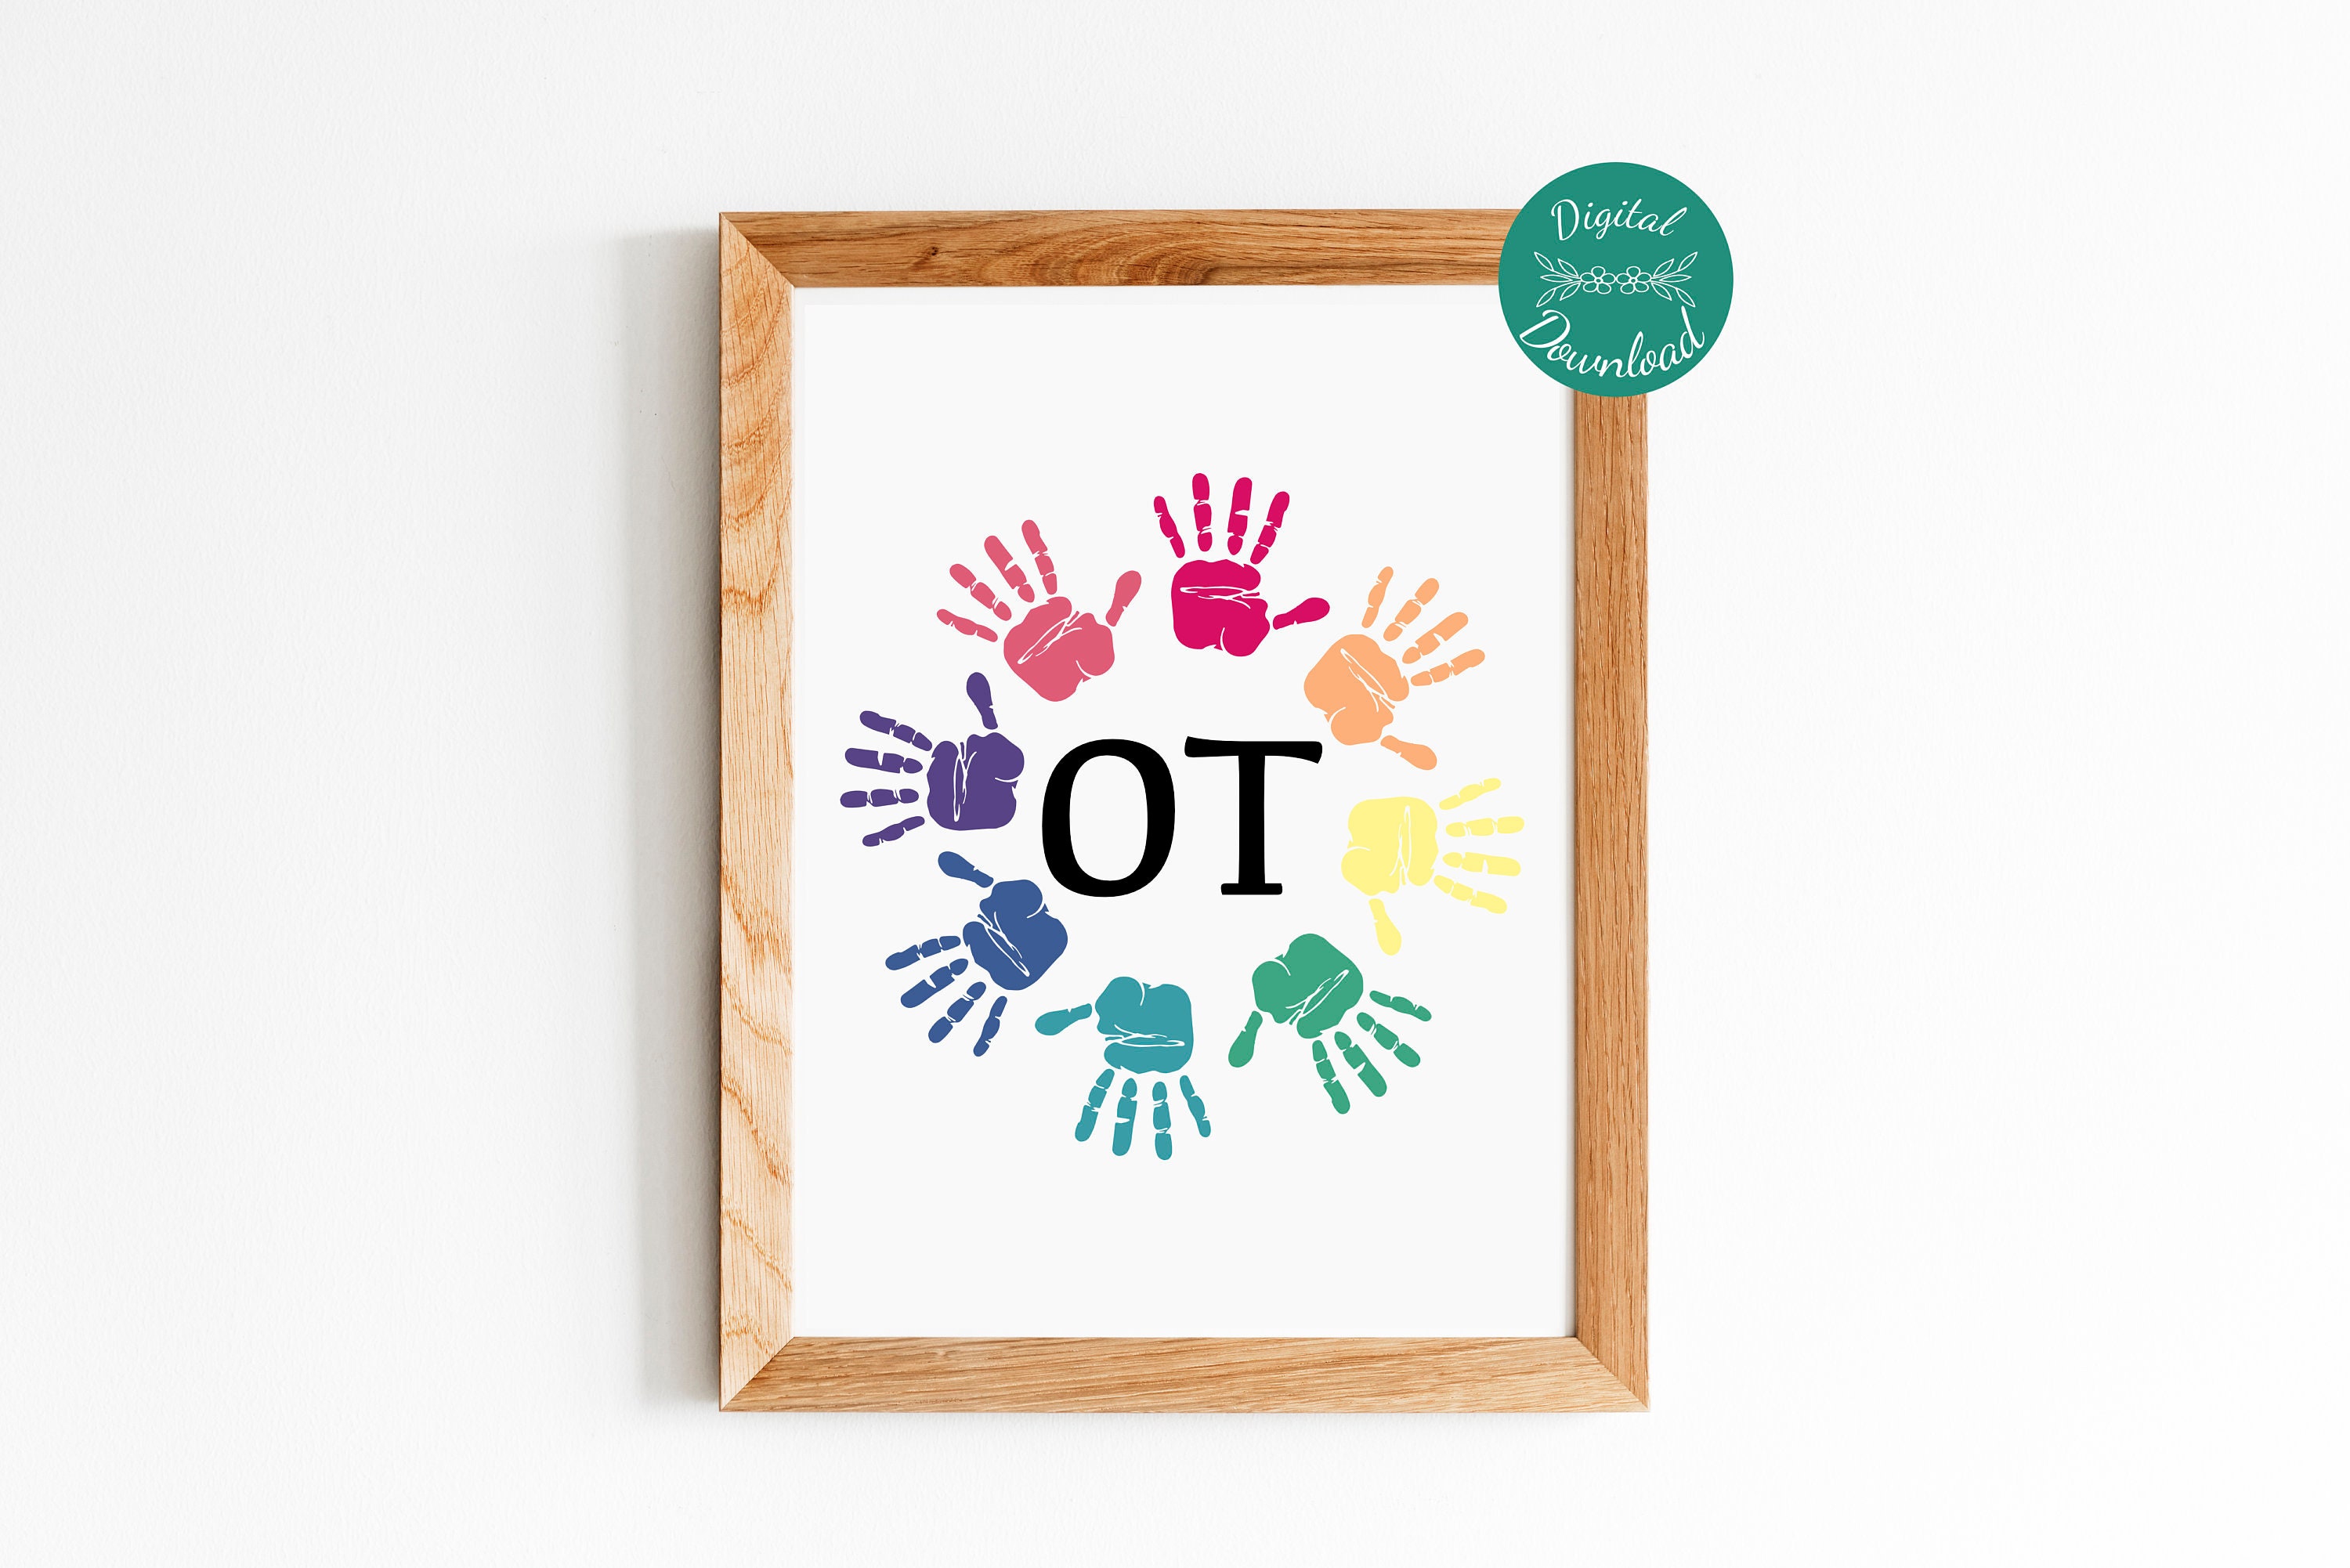 occupational-therapy-printable-download-wall-art-poster-for-etsy